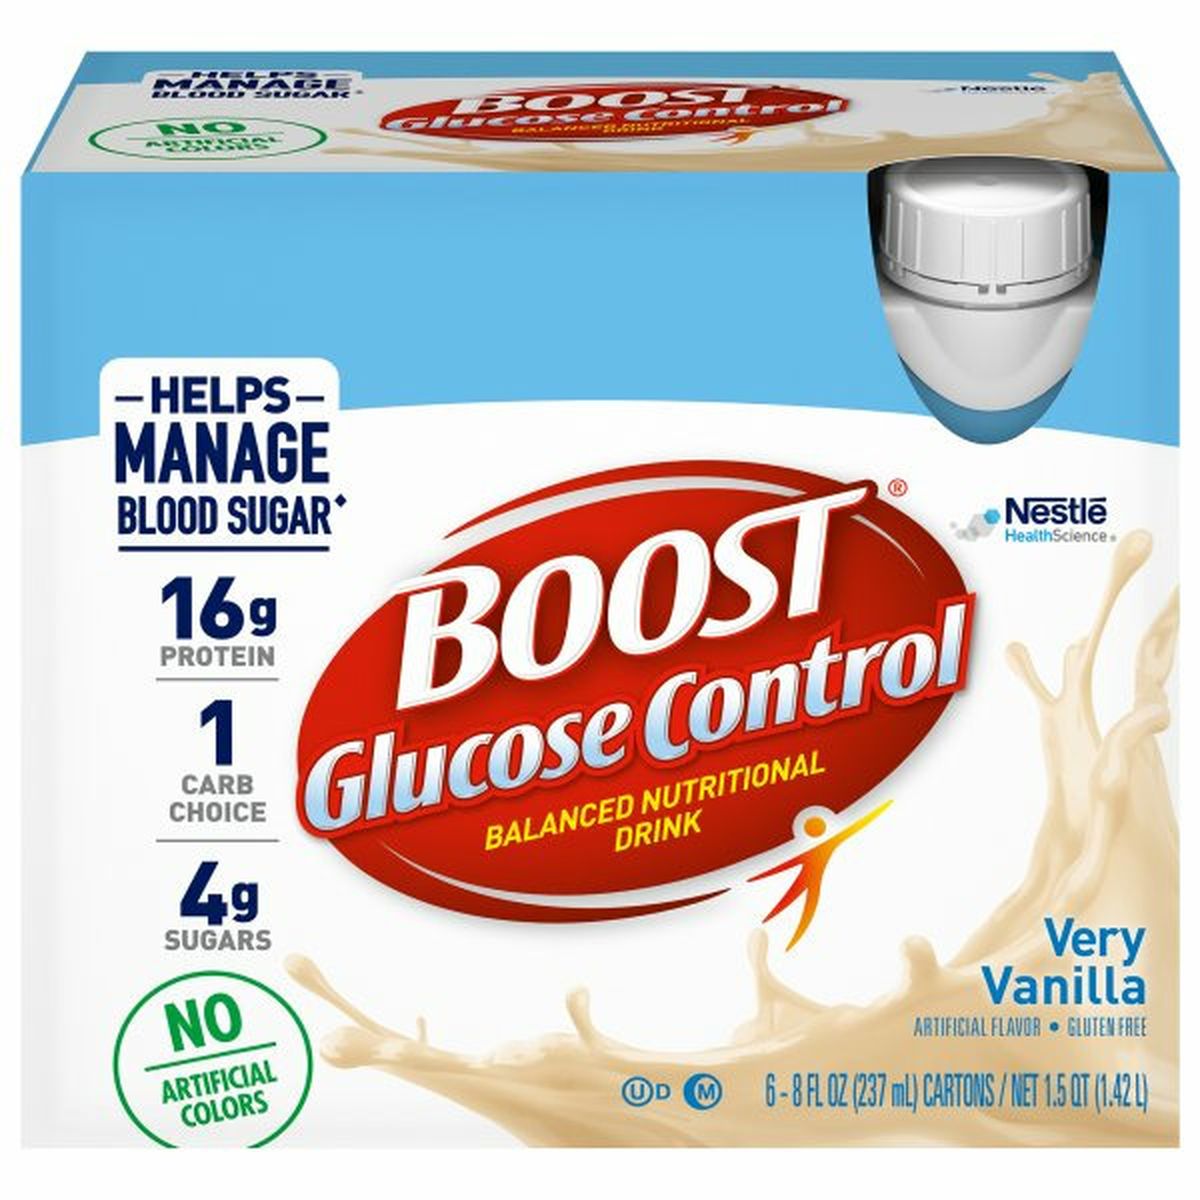 Calories in Boost Nutritional Drink, Balanced, Very Vanilla, Glucose Control